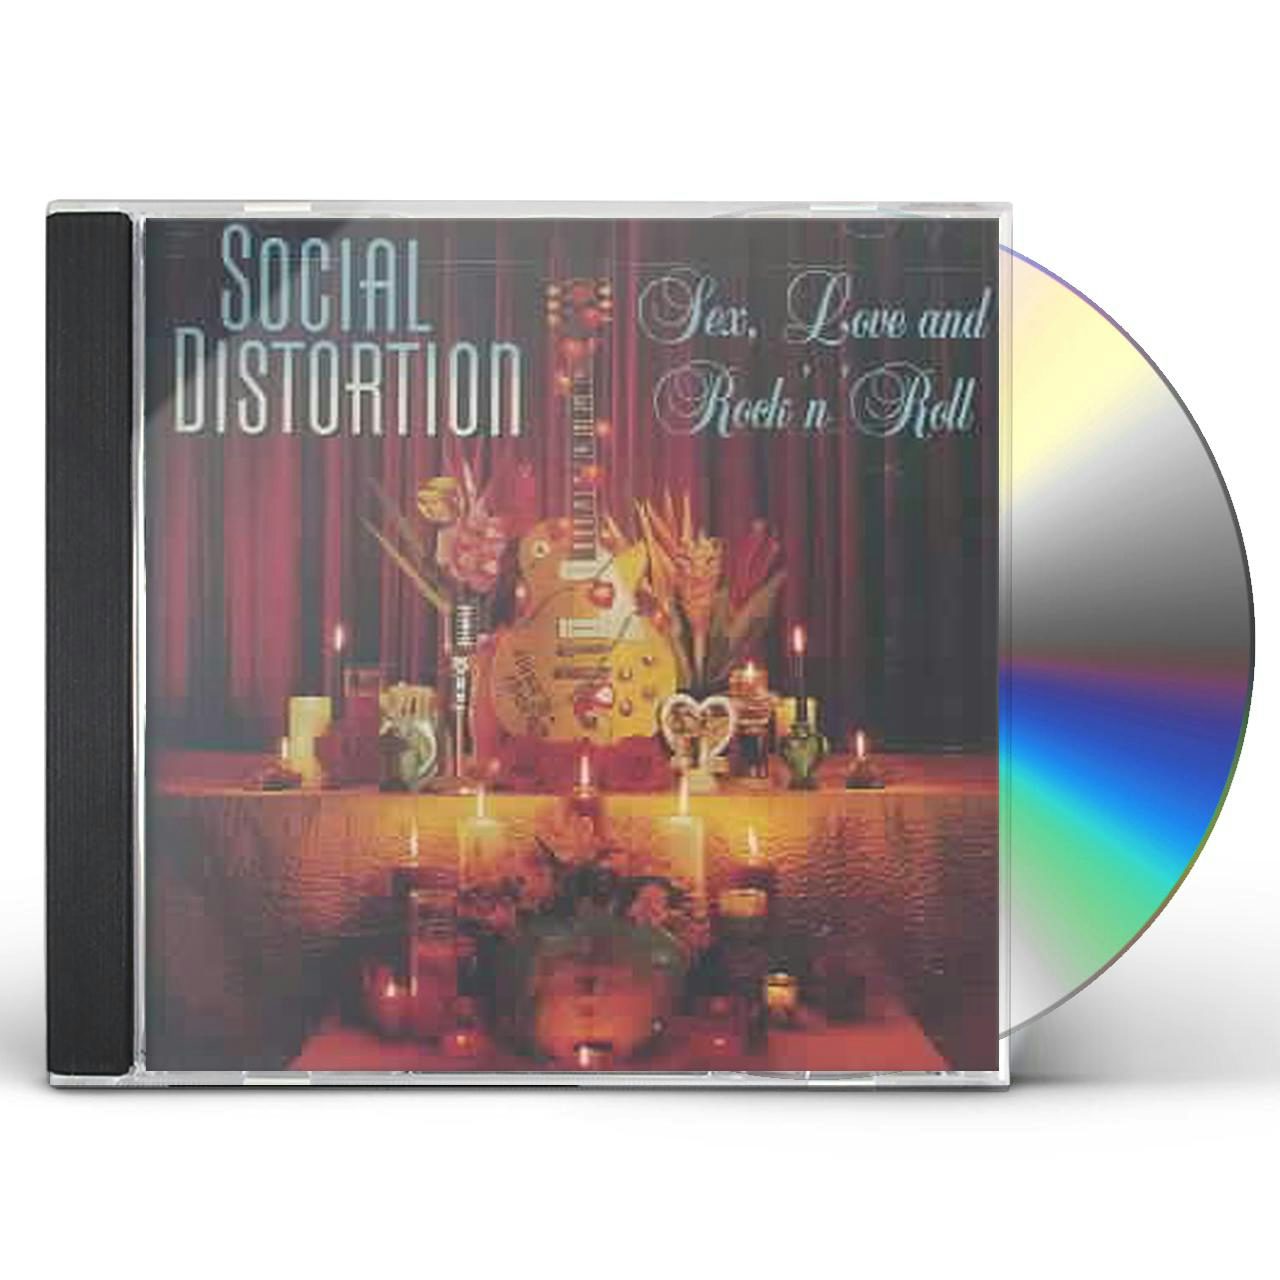 Social Distortion SEX LOVE and ROCK N ROLL CD photo